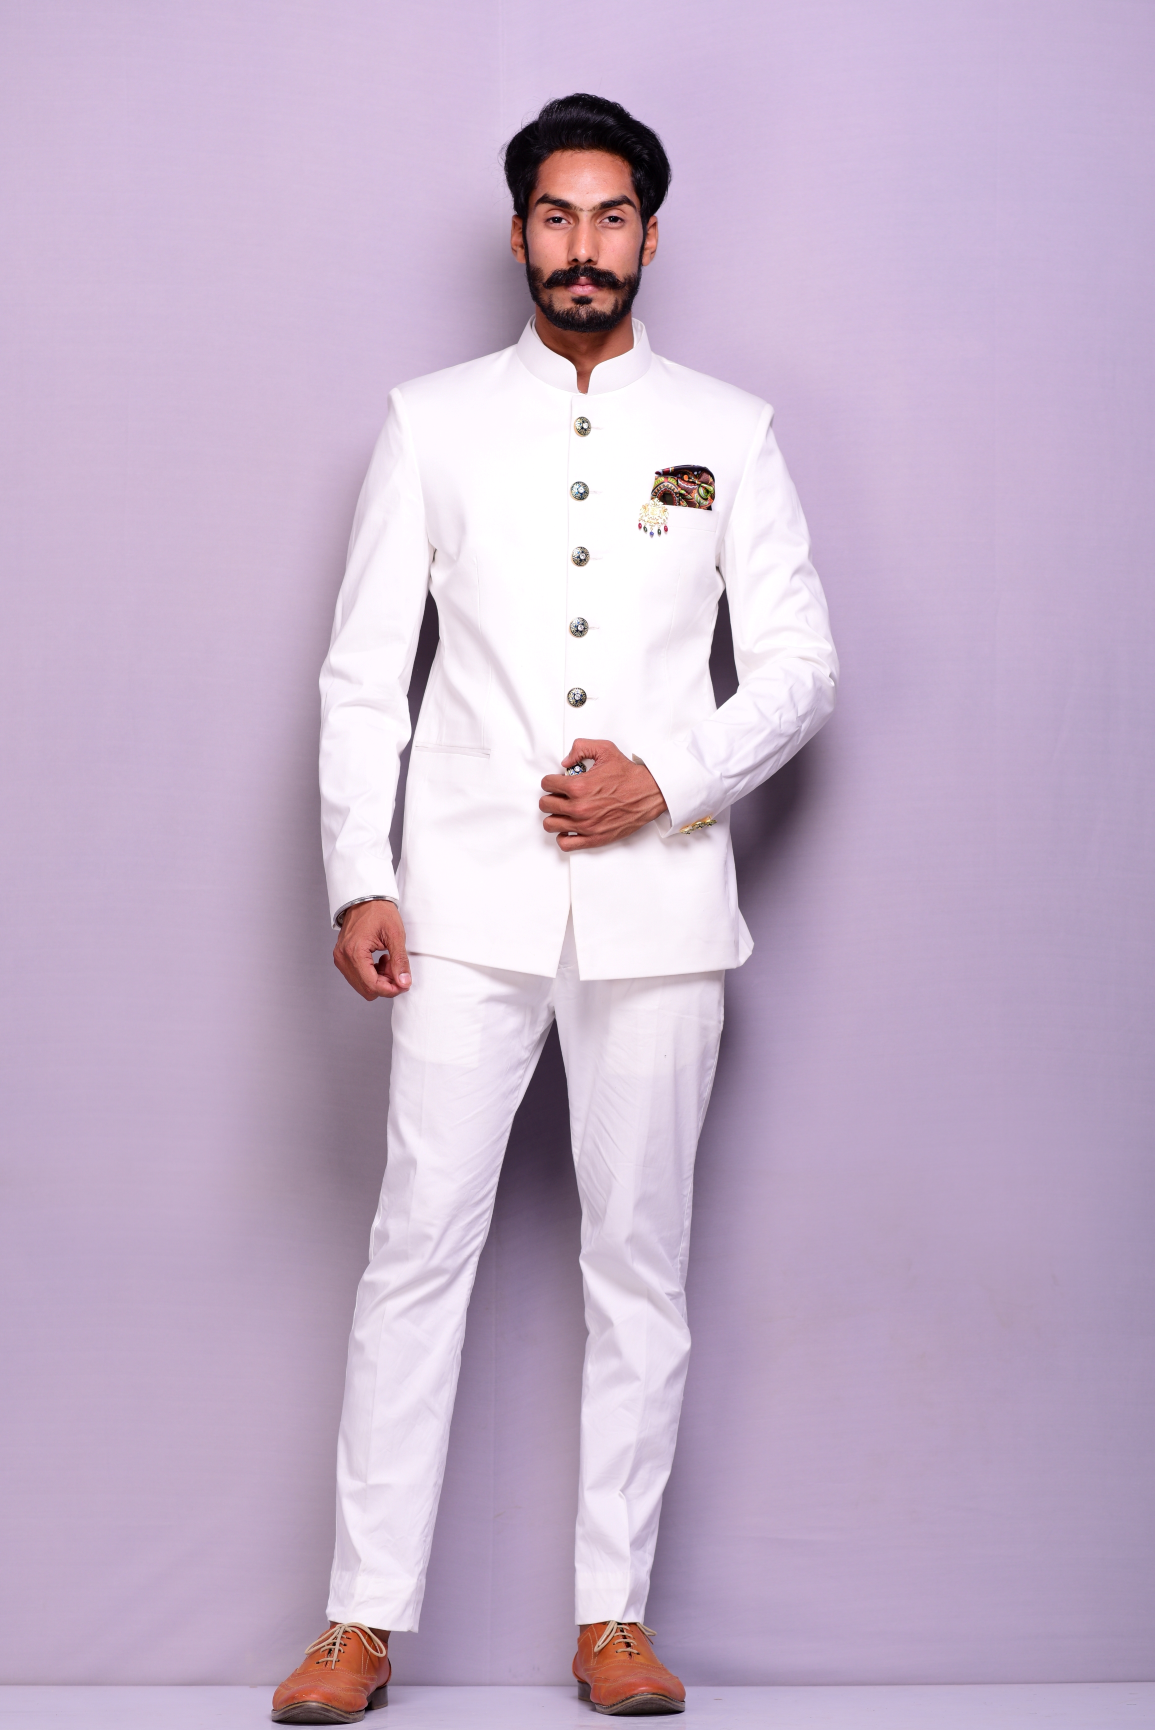 Classic White Jodhpuri Bandhgala Suit for Men |Terry Rayon|  Best Buy for Formal Events Parties Weddings | Elite Elegant Dignified Appearance